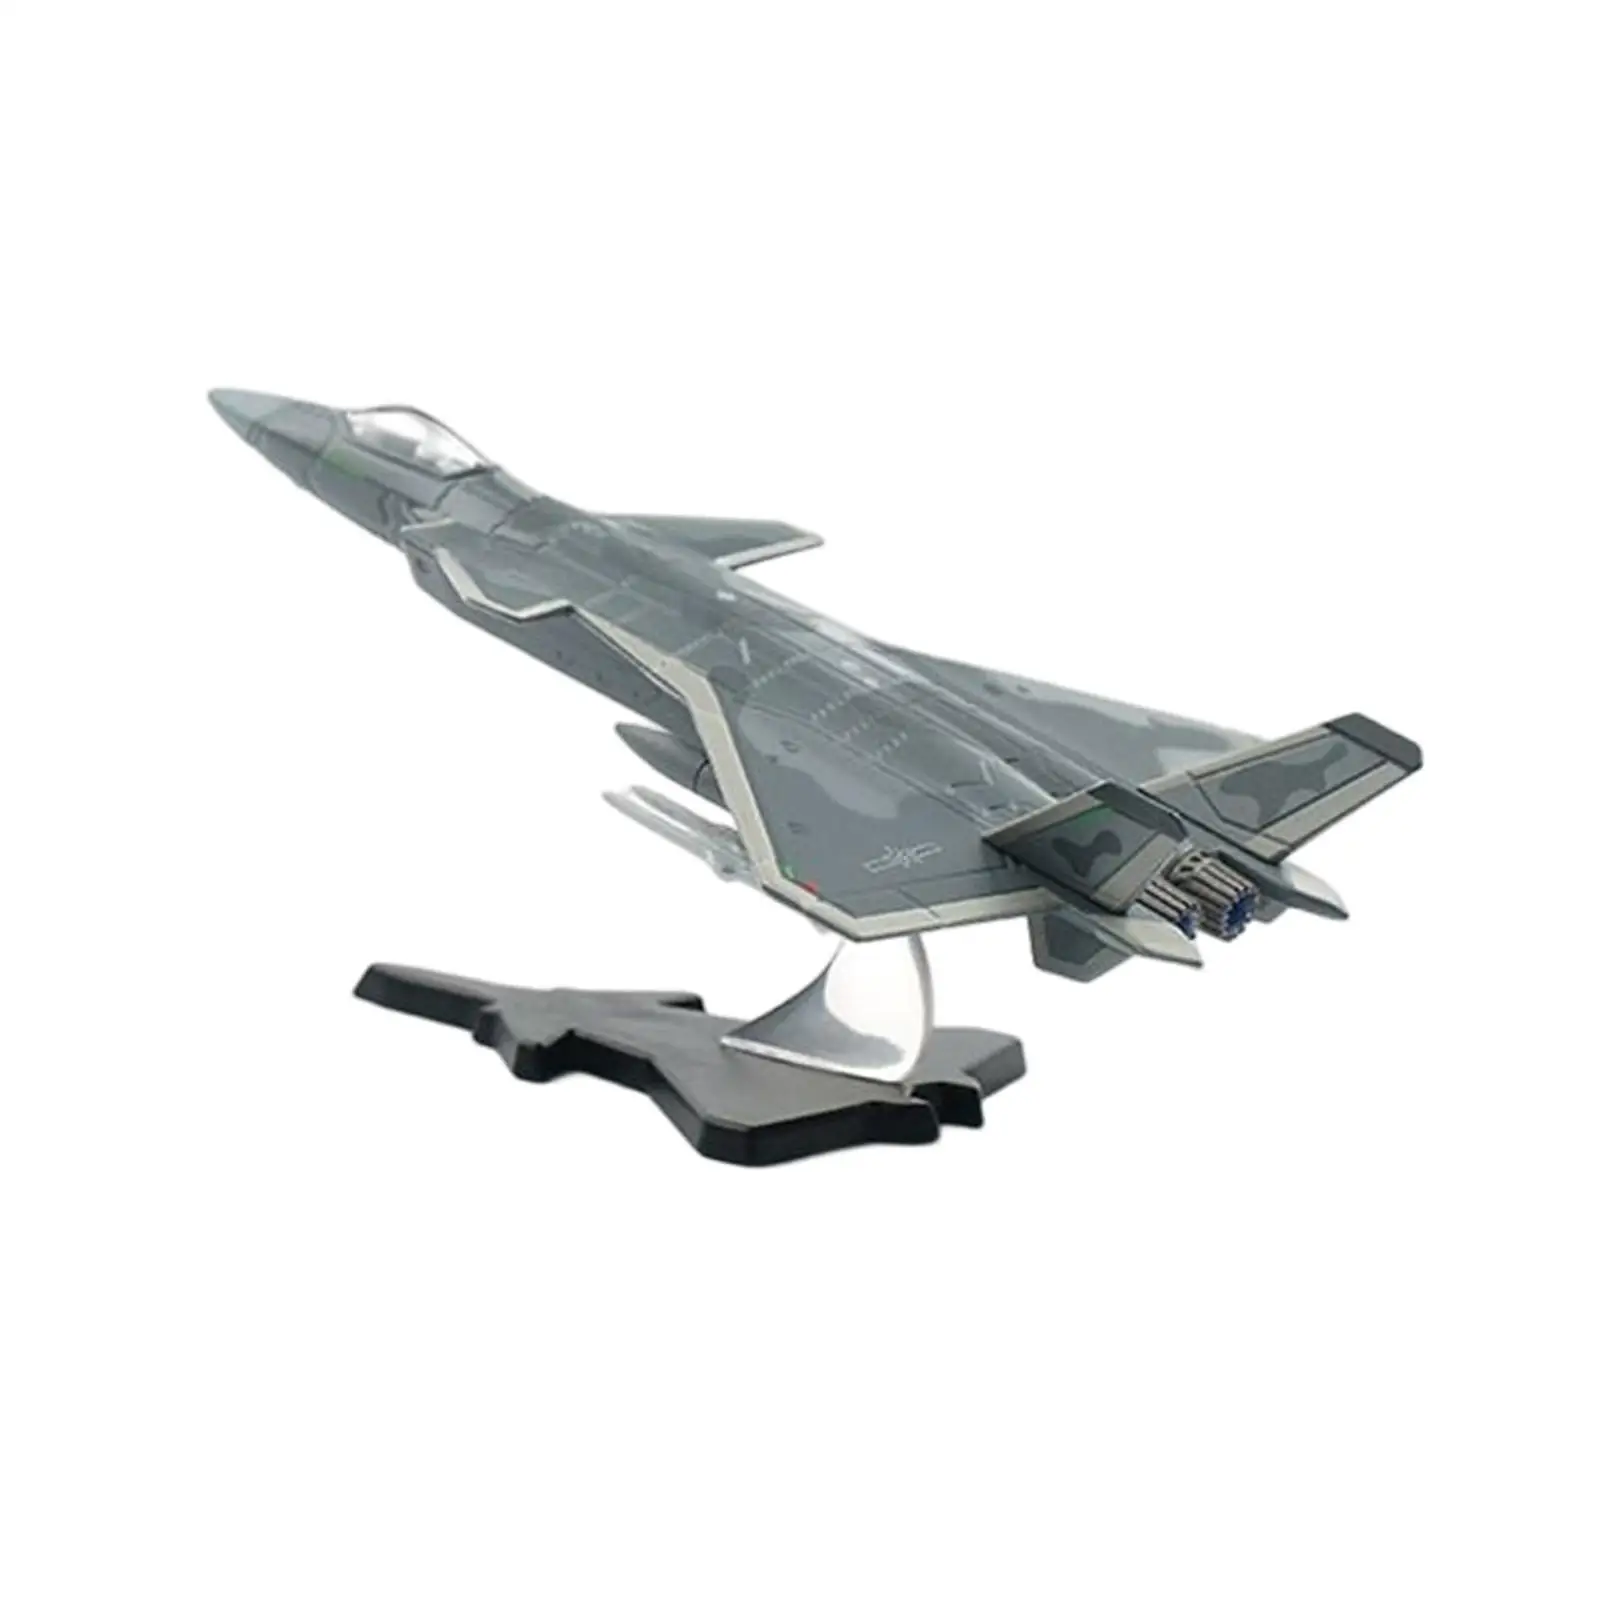 Alloy Plane Model J20 Diecast Plane Collectables Ornaments Fighter Model for Shelf Bedroom Home Holiday Gifts Collection